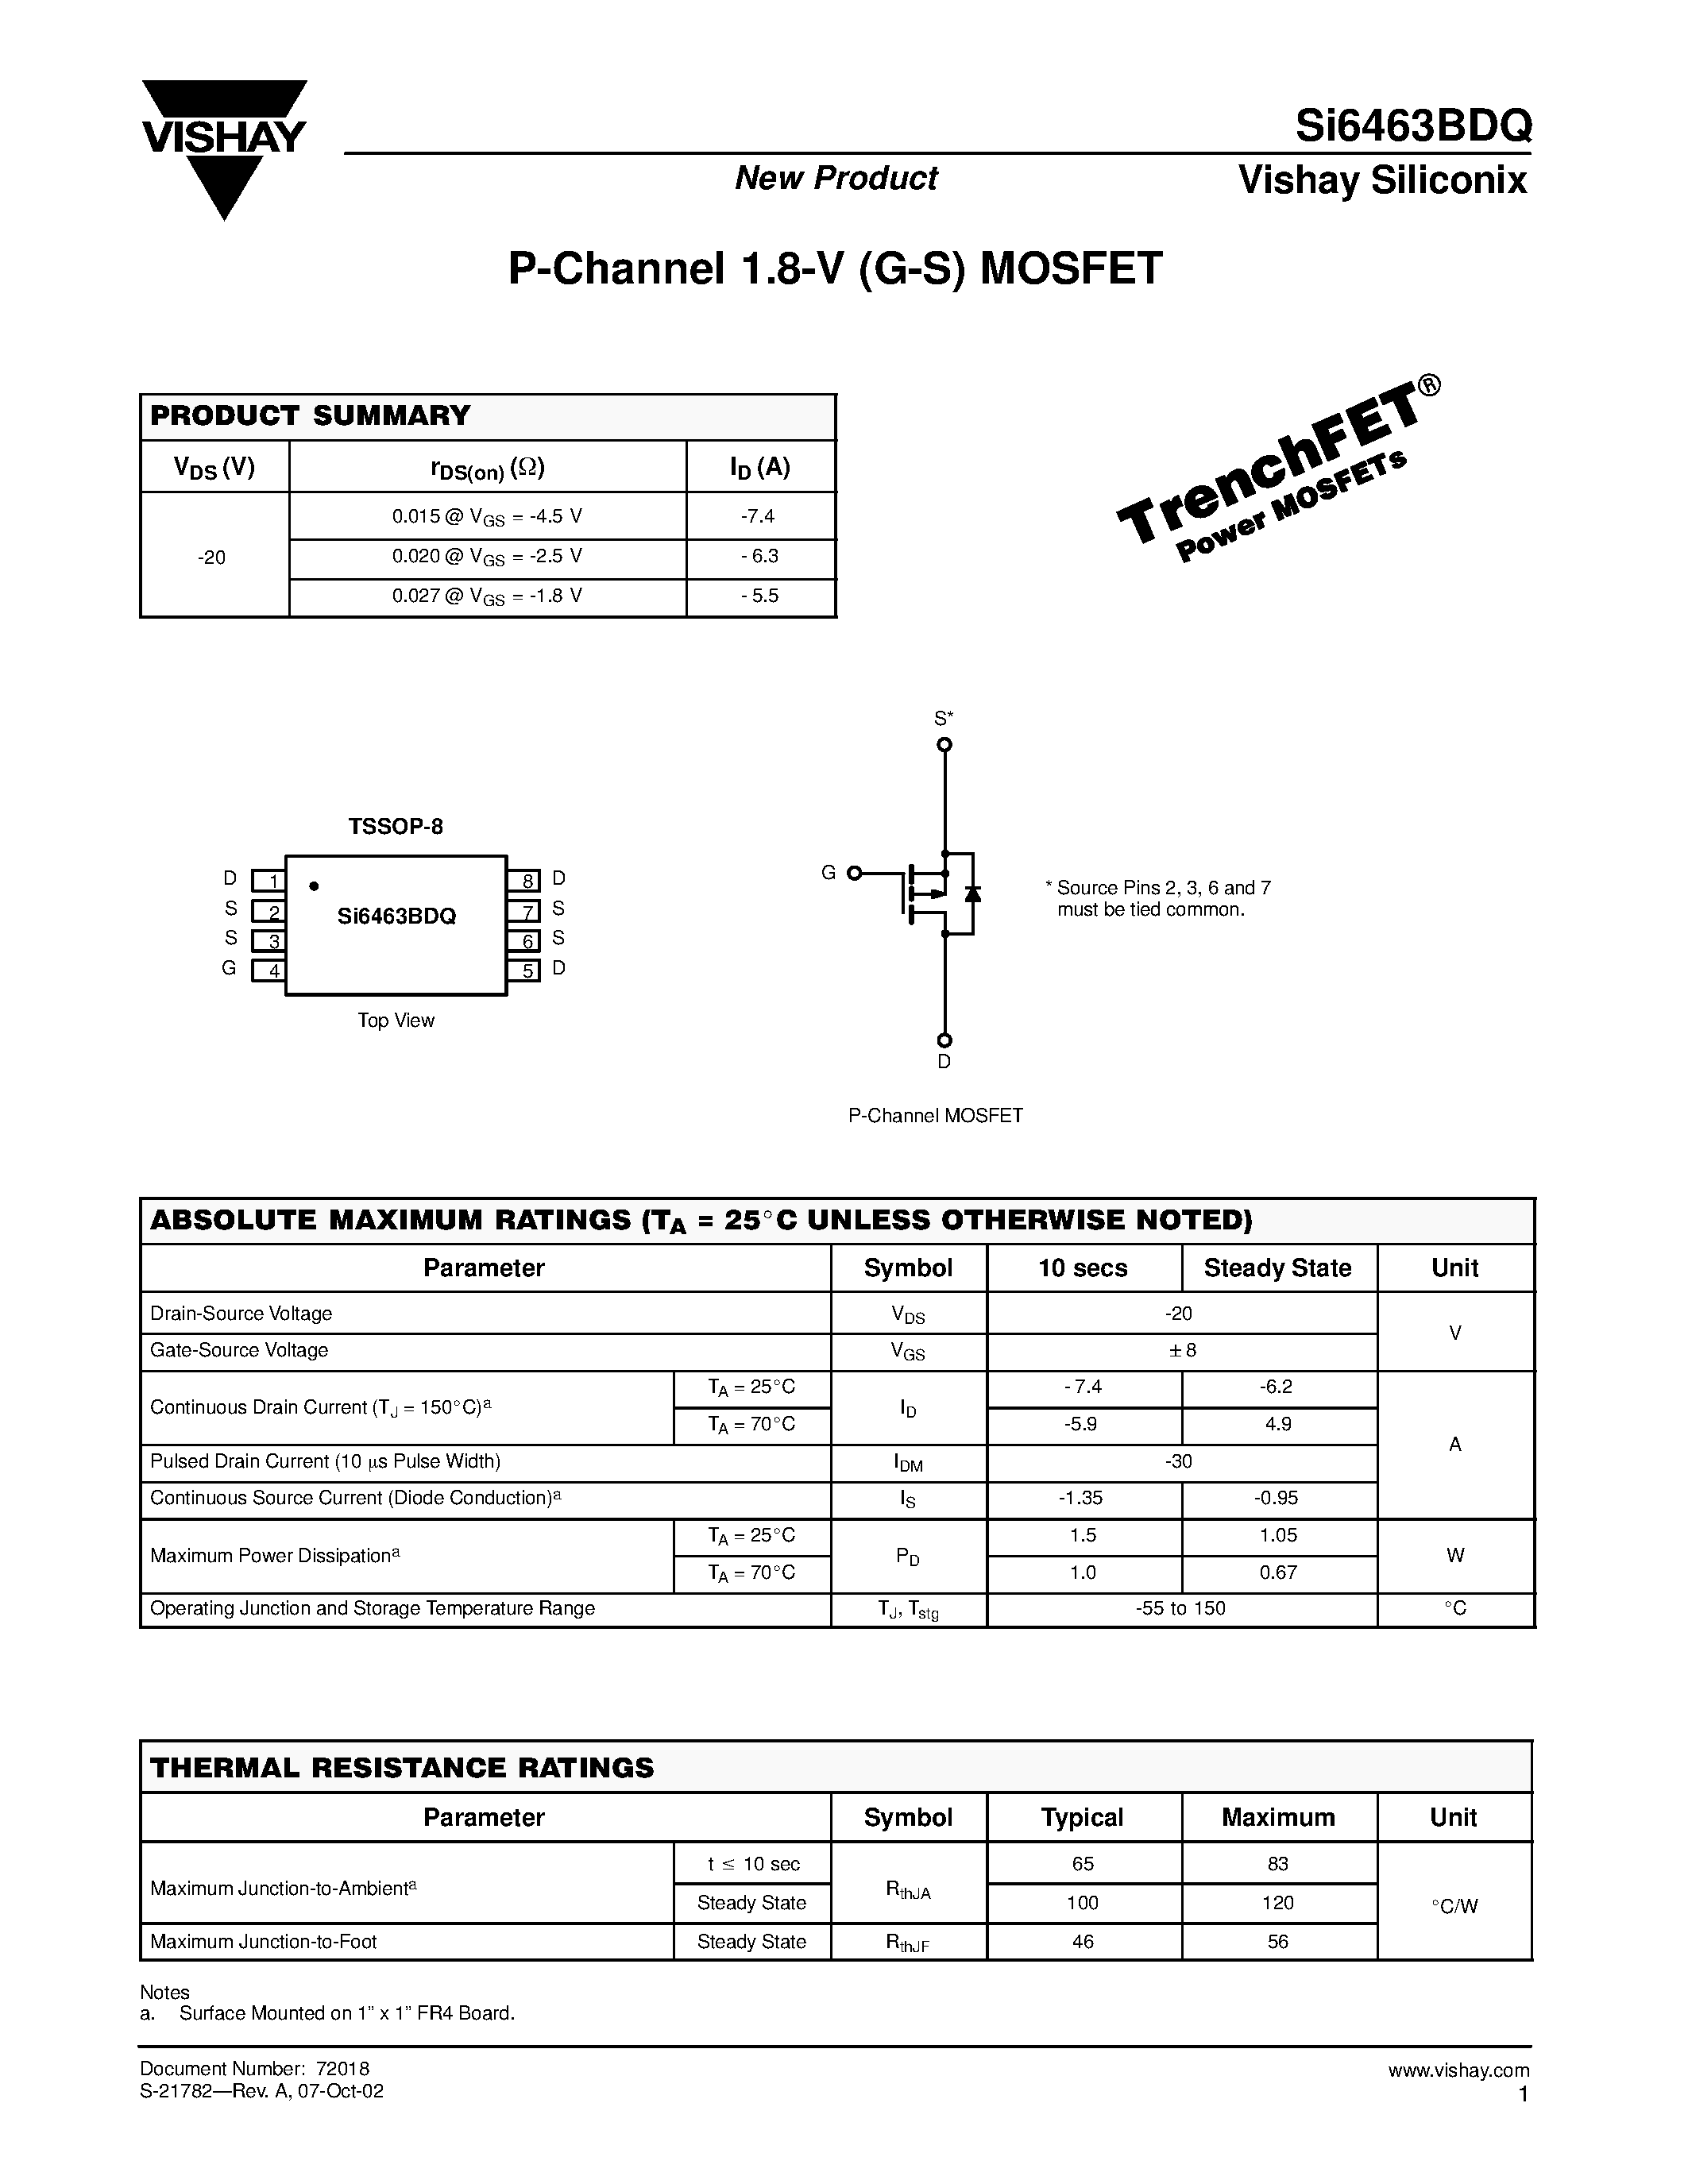 Даташит SI6463BDQ - P-Channel 1.8-V (G-S) MOSFET страница 1